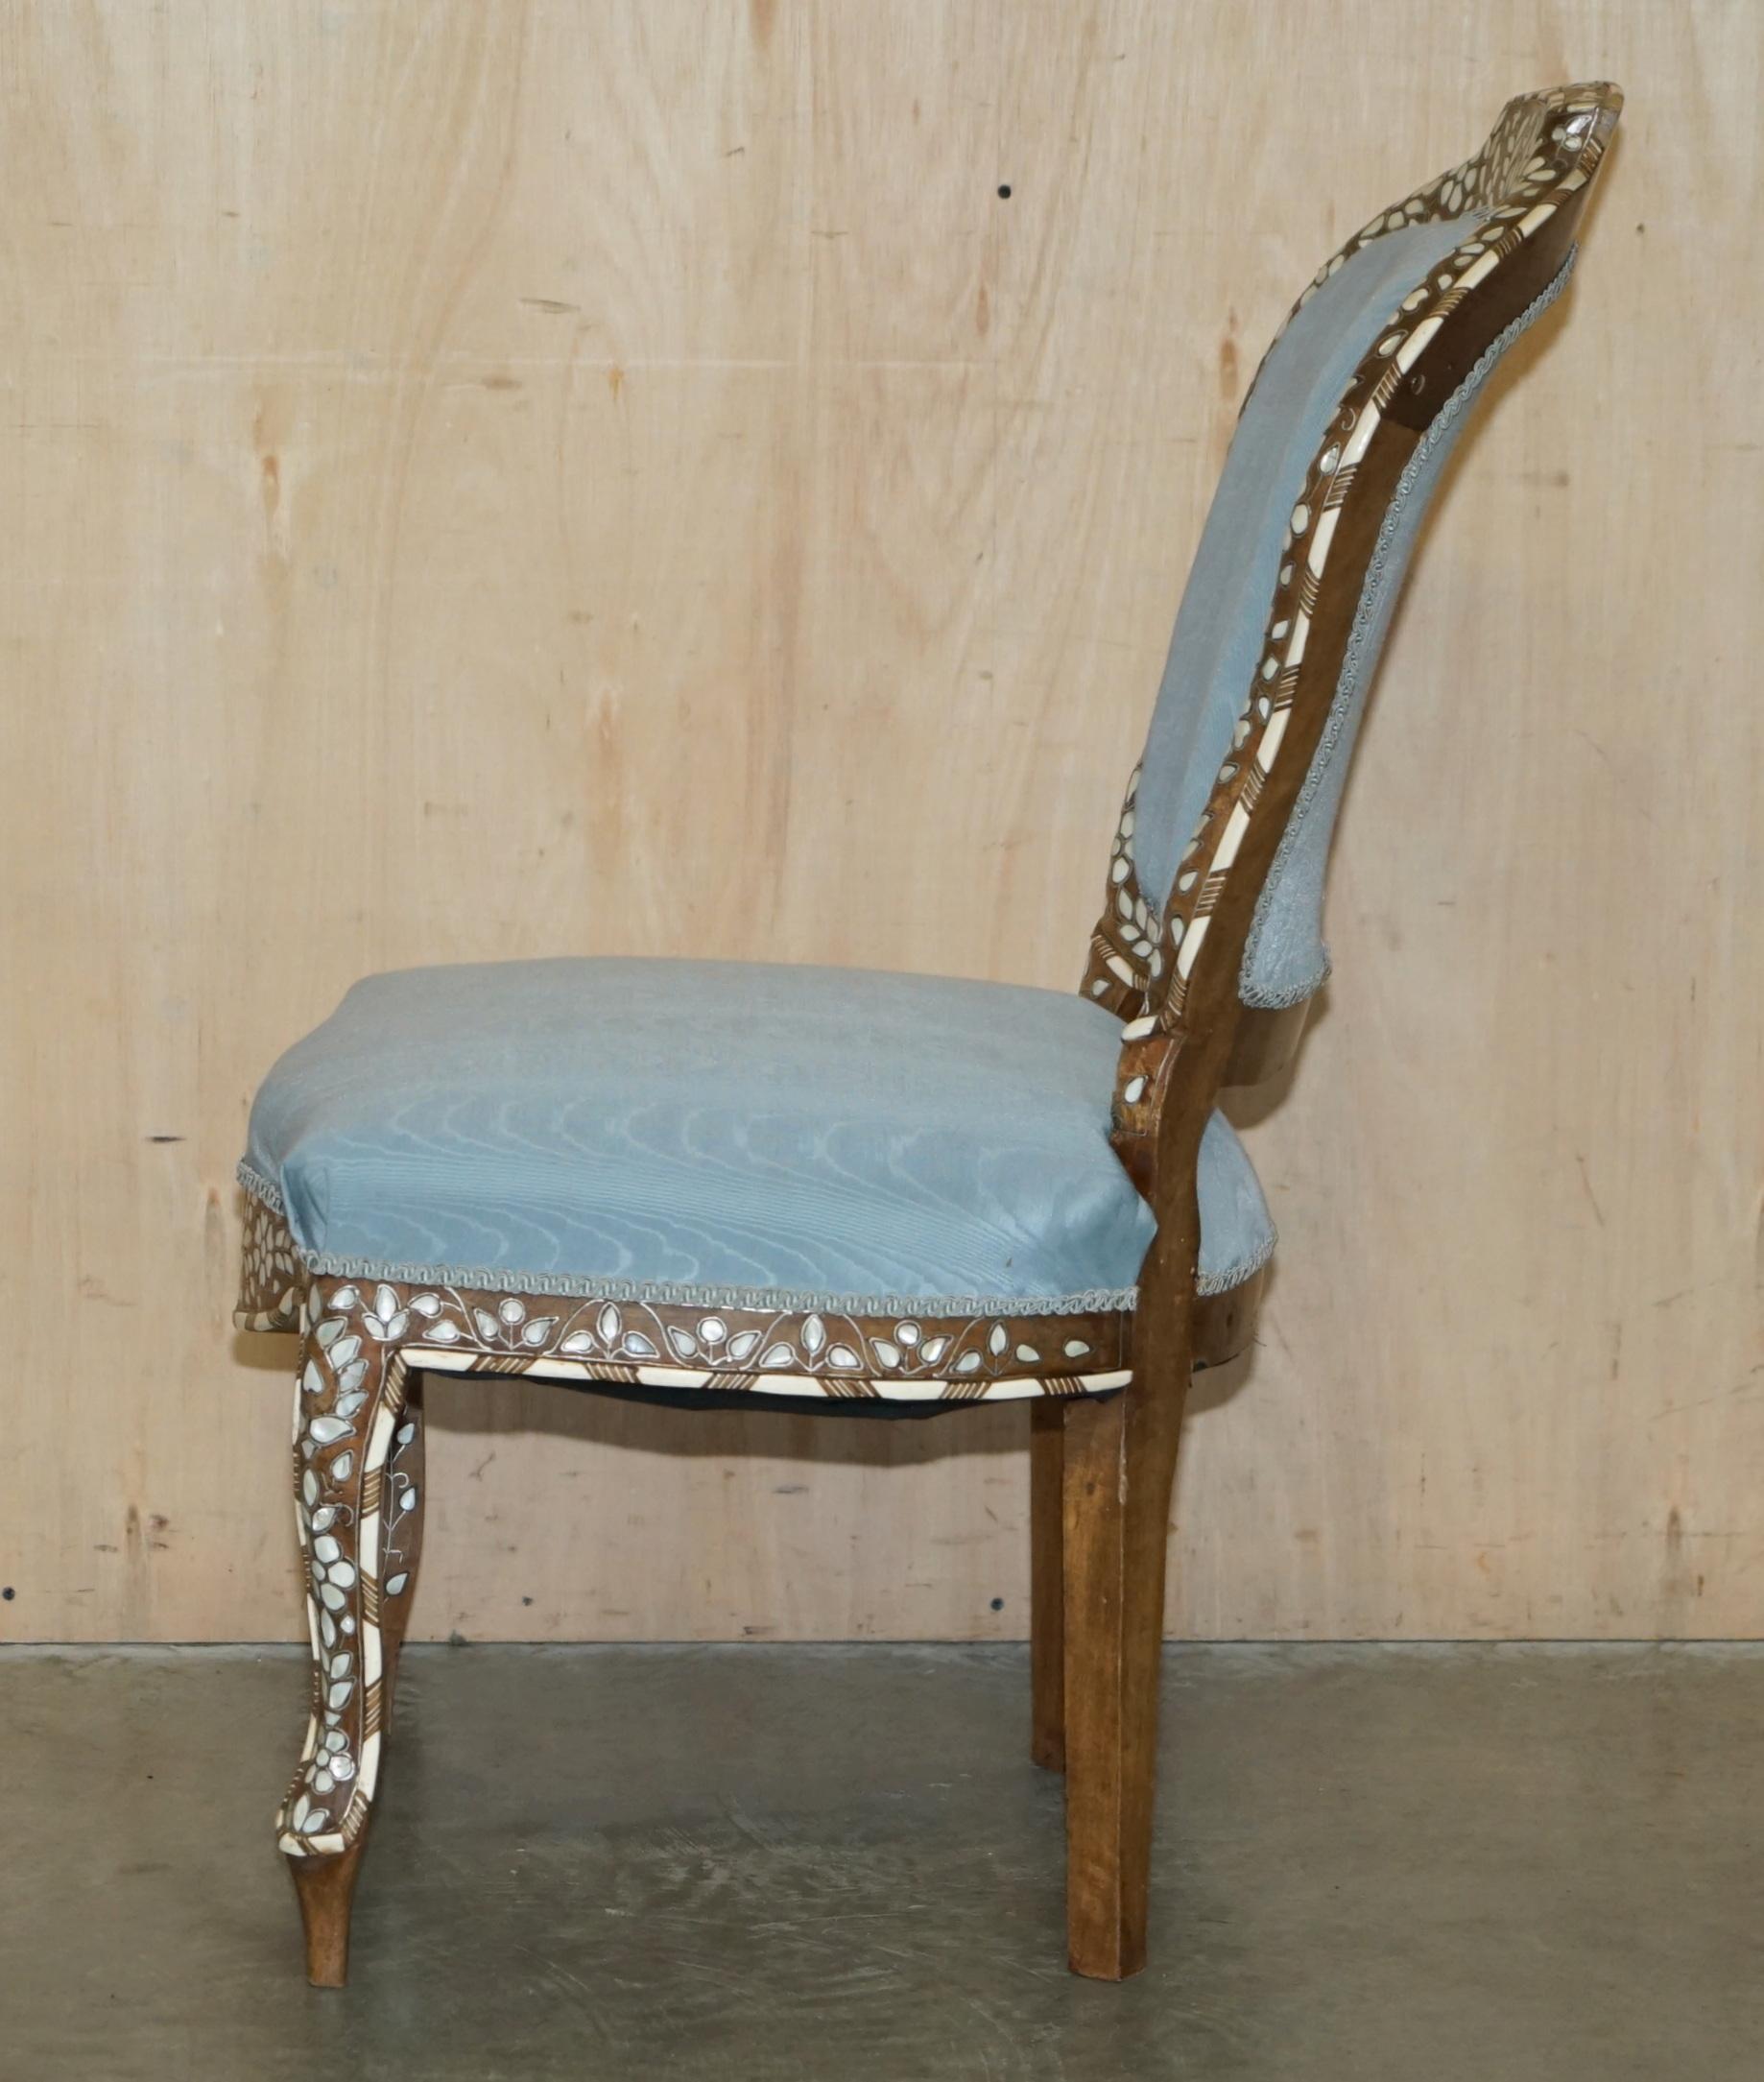 SUBLiME PAIR OF ANTIQUE MOTHER OF PEARL INLAID SIDE CHAIRS WITH HARDWOOD FRAMES For Sale 12